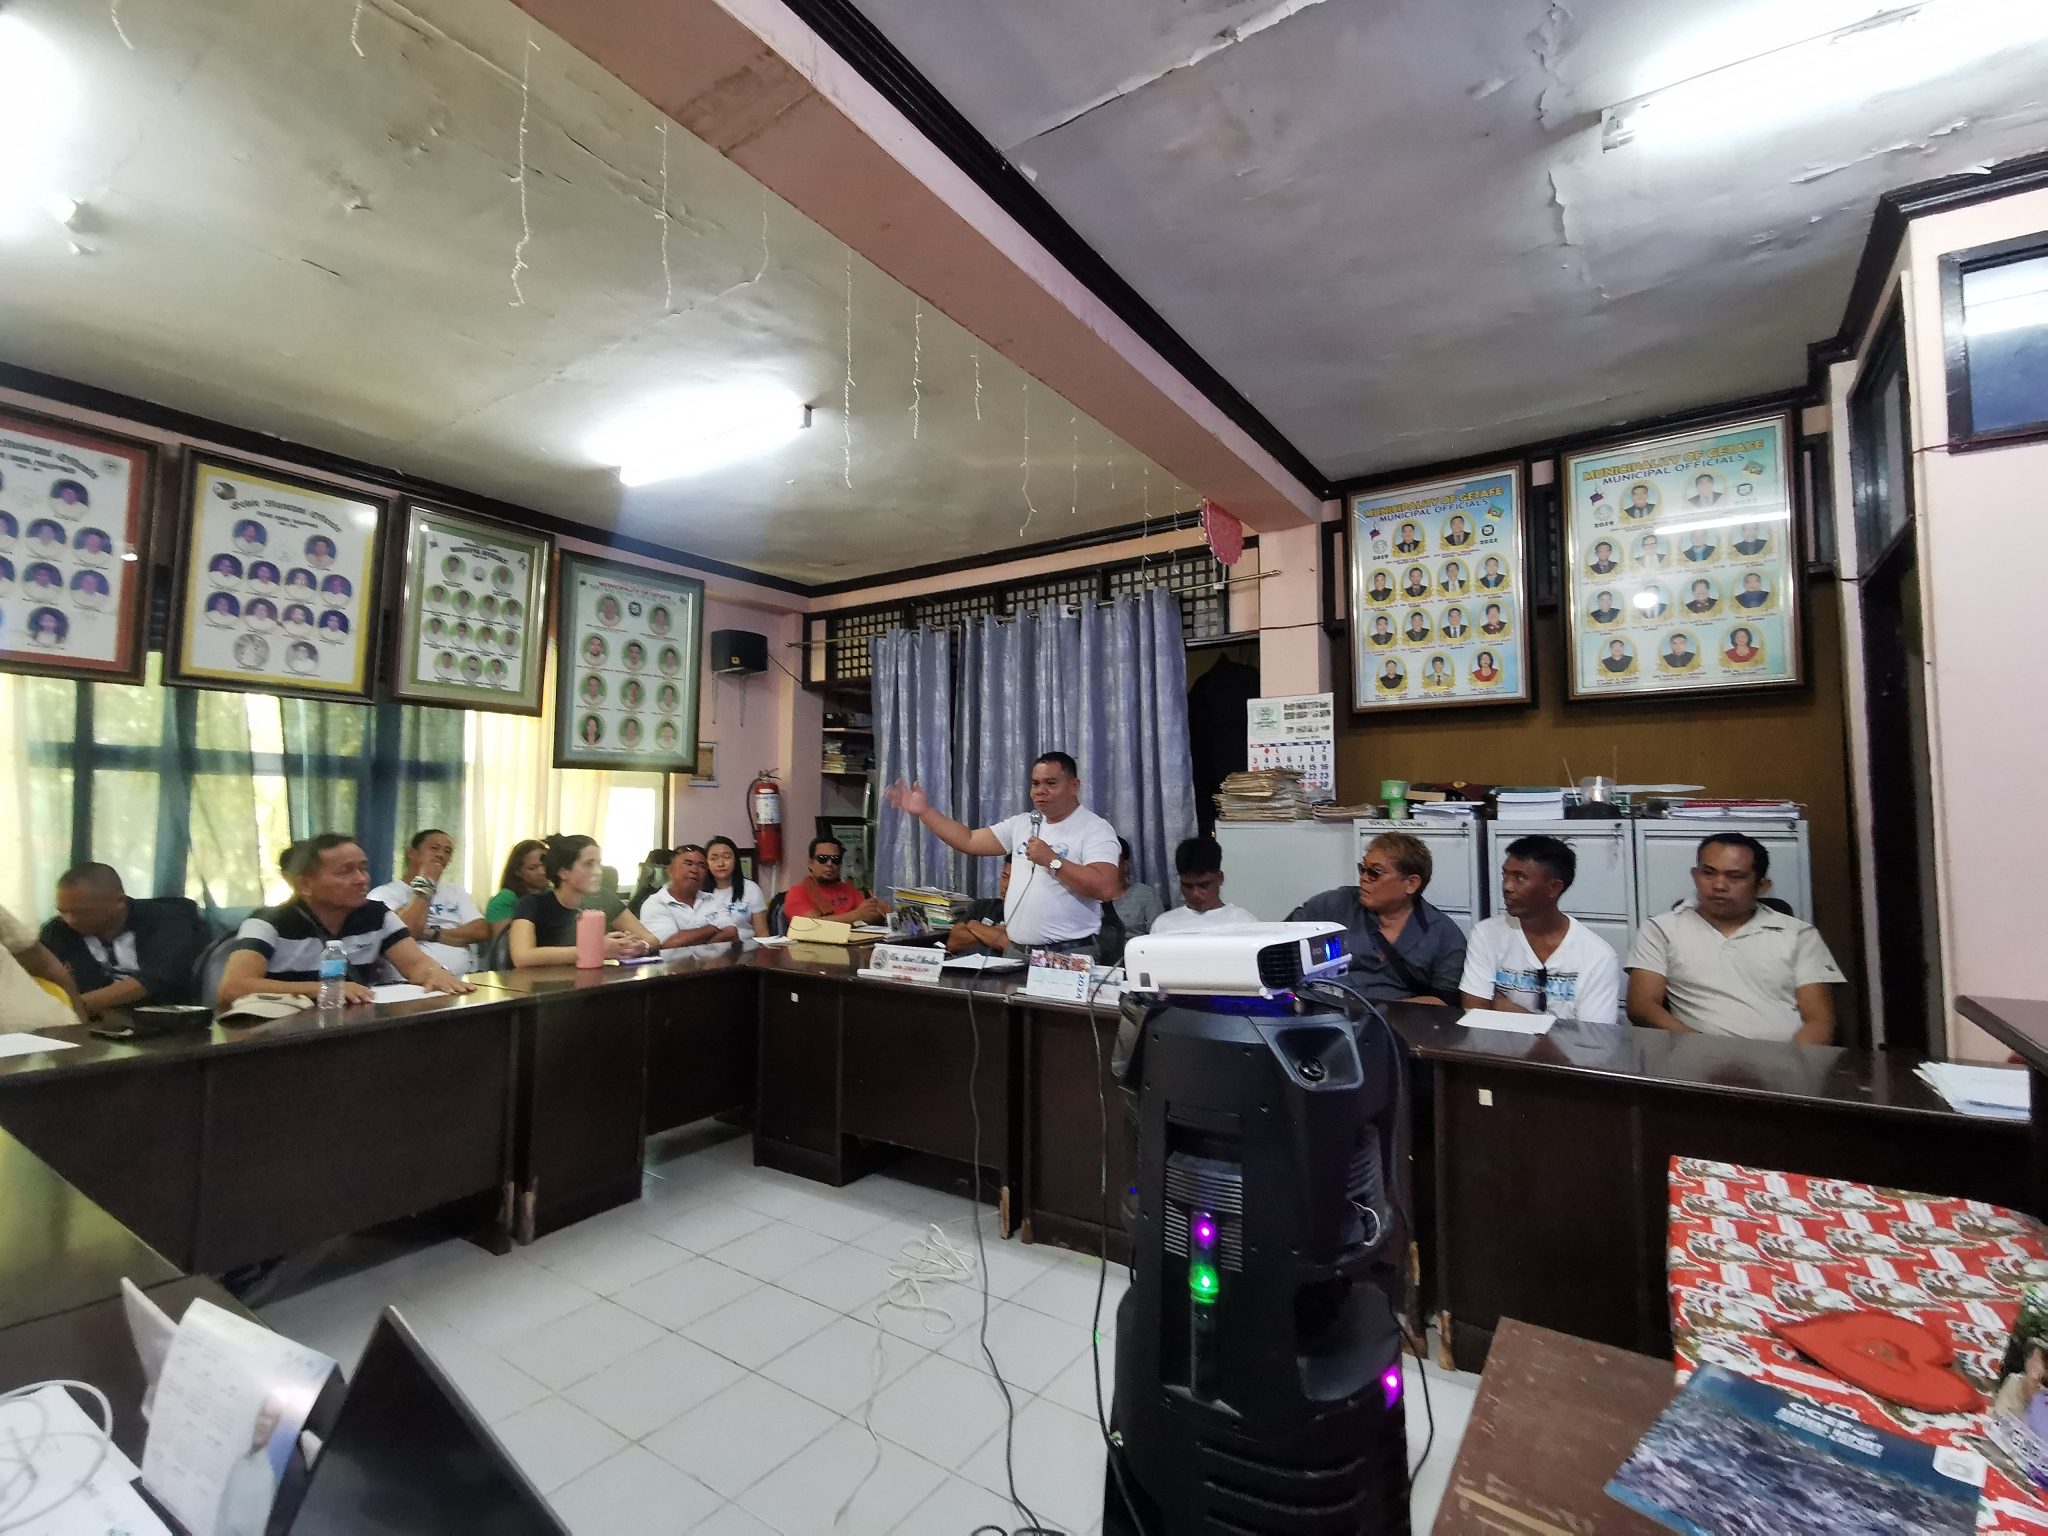 CCEF conducted a Municipal Fisheries and Aquatic Resources Management Council’s(MFARMC) orientation and reorganization